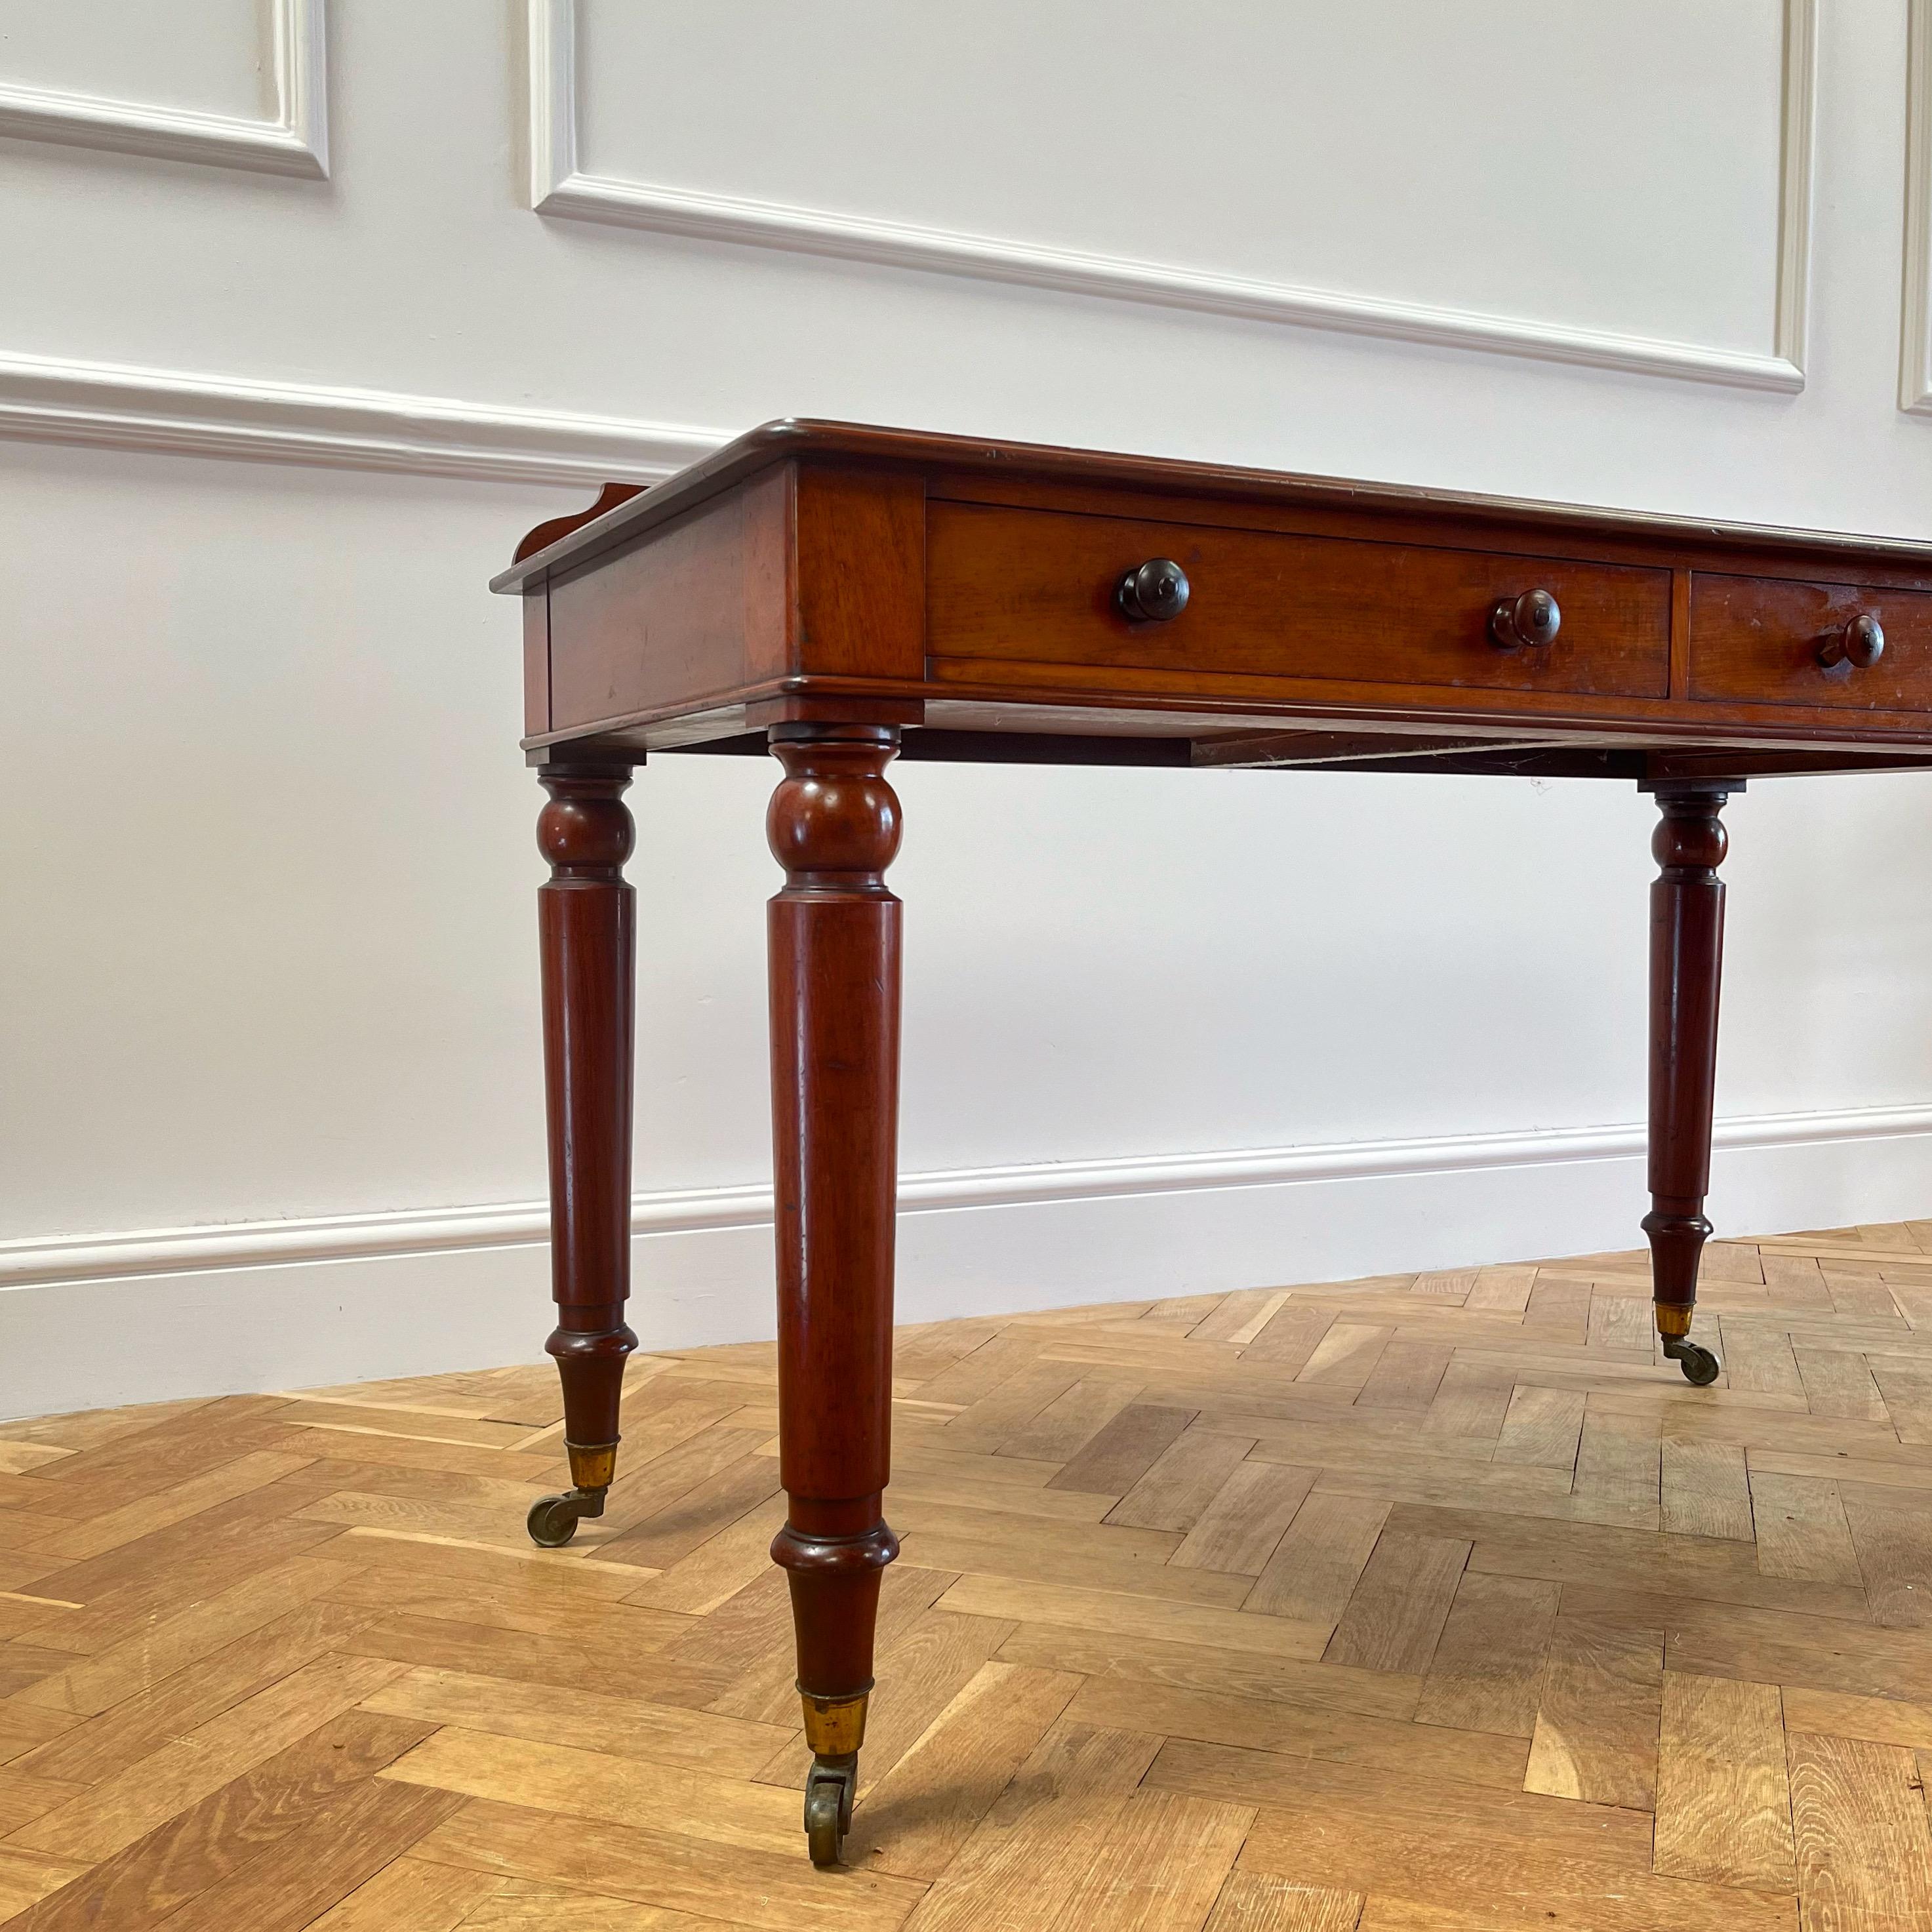 A very fine mahogany writing table on four masculine legs, terminating in cope castors with two drawers above, deep rich timber top with stamp.

England, 1820

H 80 x W 122 x D 57 cms (seat clearance 60 cms)

Inquire about this piece